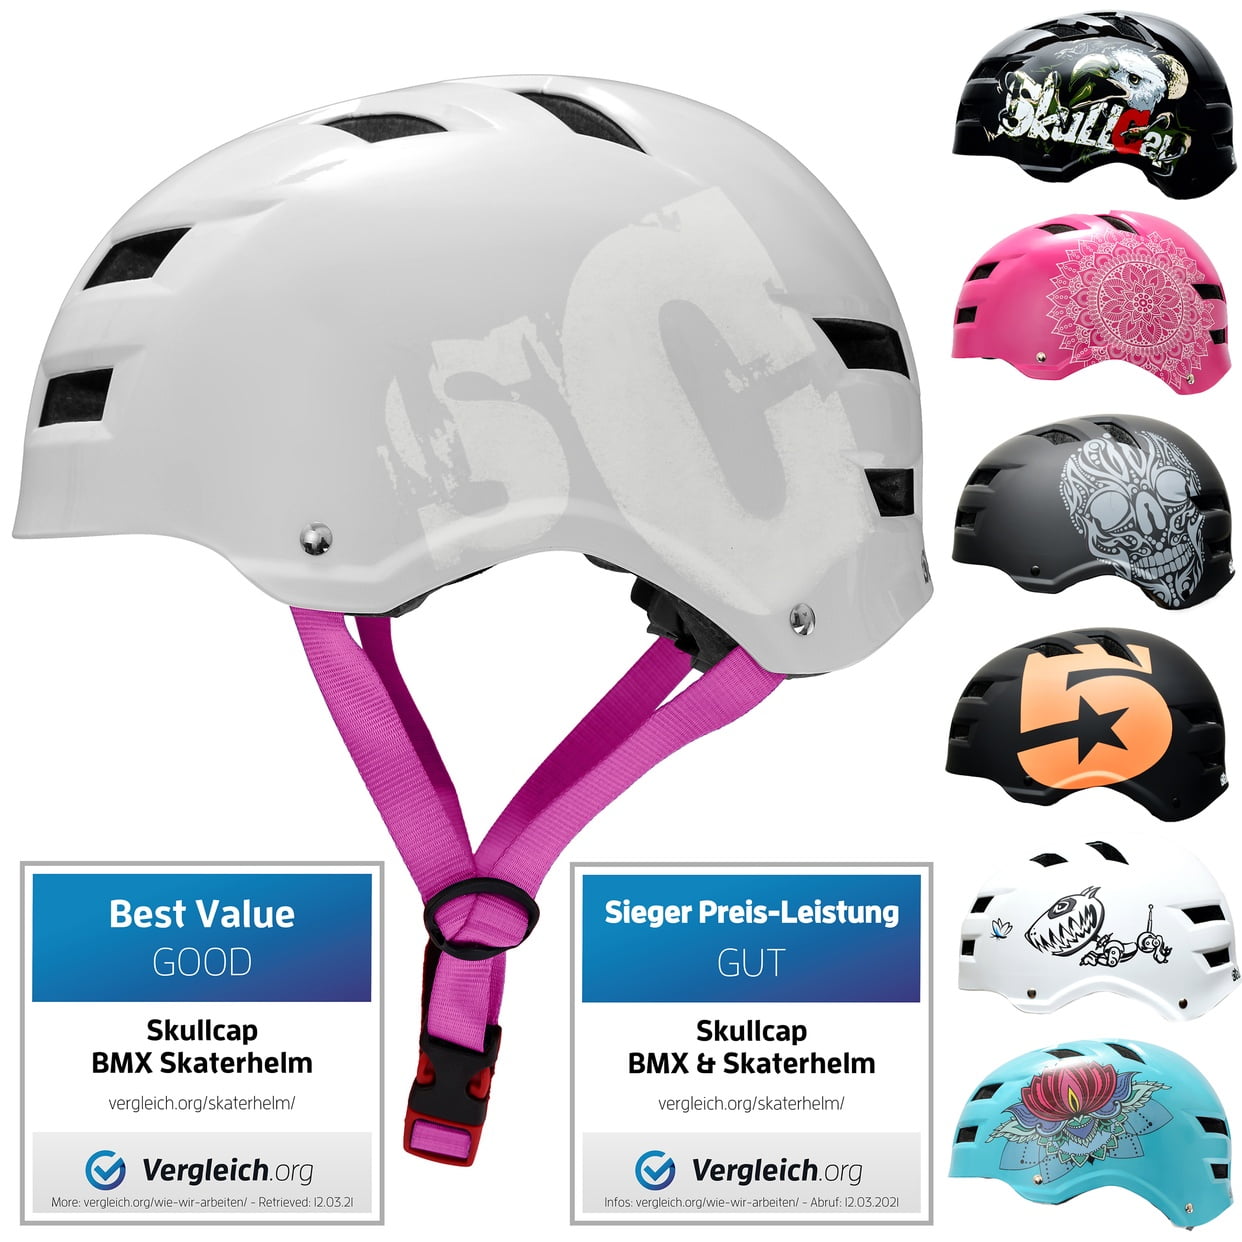 Kids/Childs/Children Helmet for Skateboard Bike Cycle Scooter Adjustable Headband for 5-8 Years Old Boys Girls Red Pink Blue